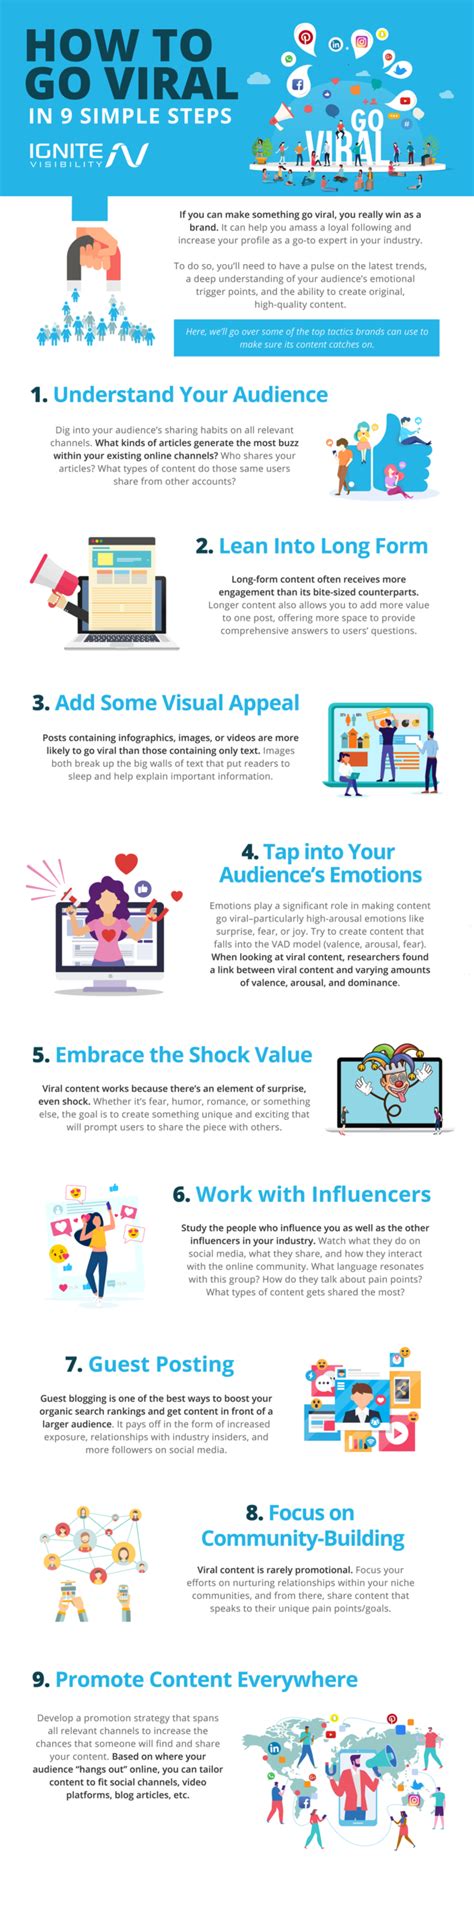 How To Go Viral In 9 Simple Steps